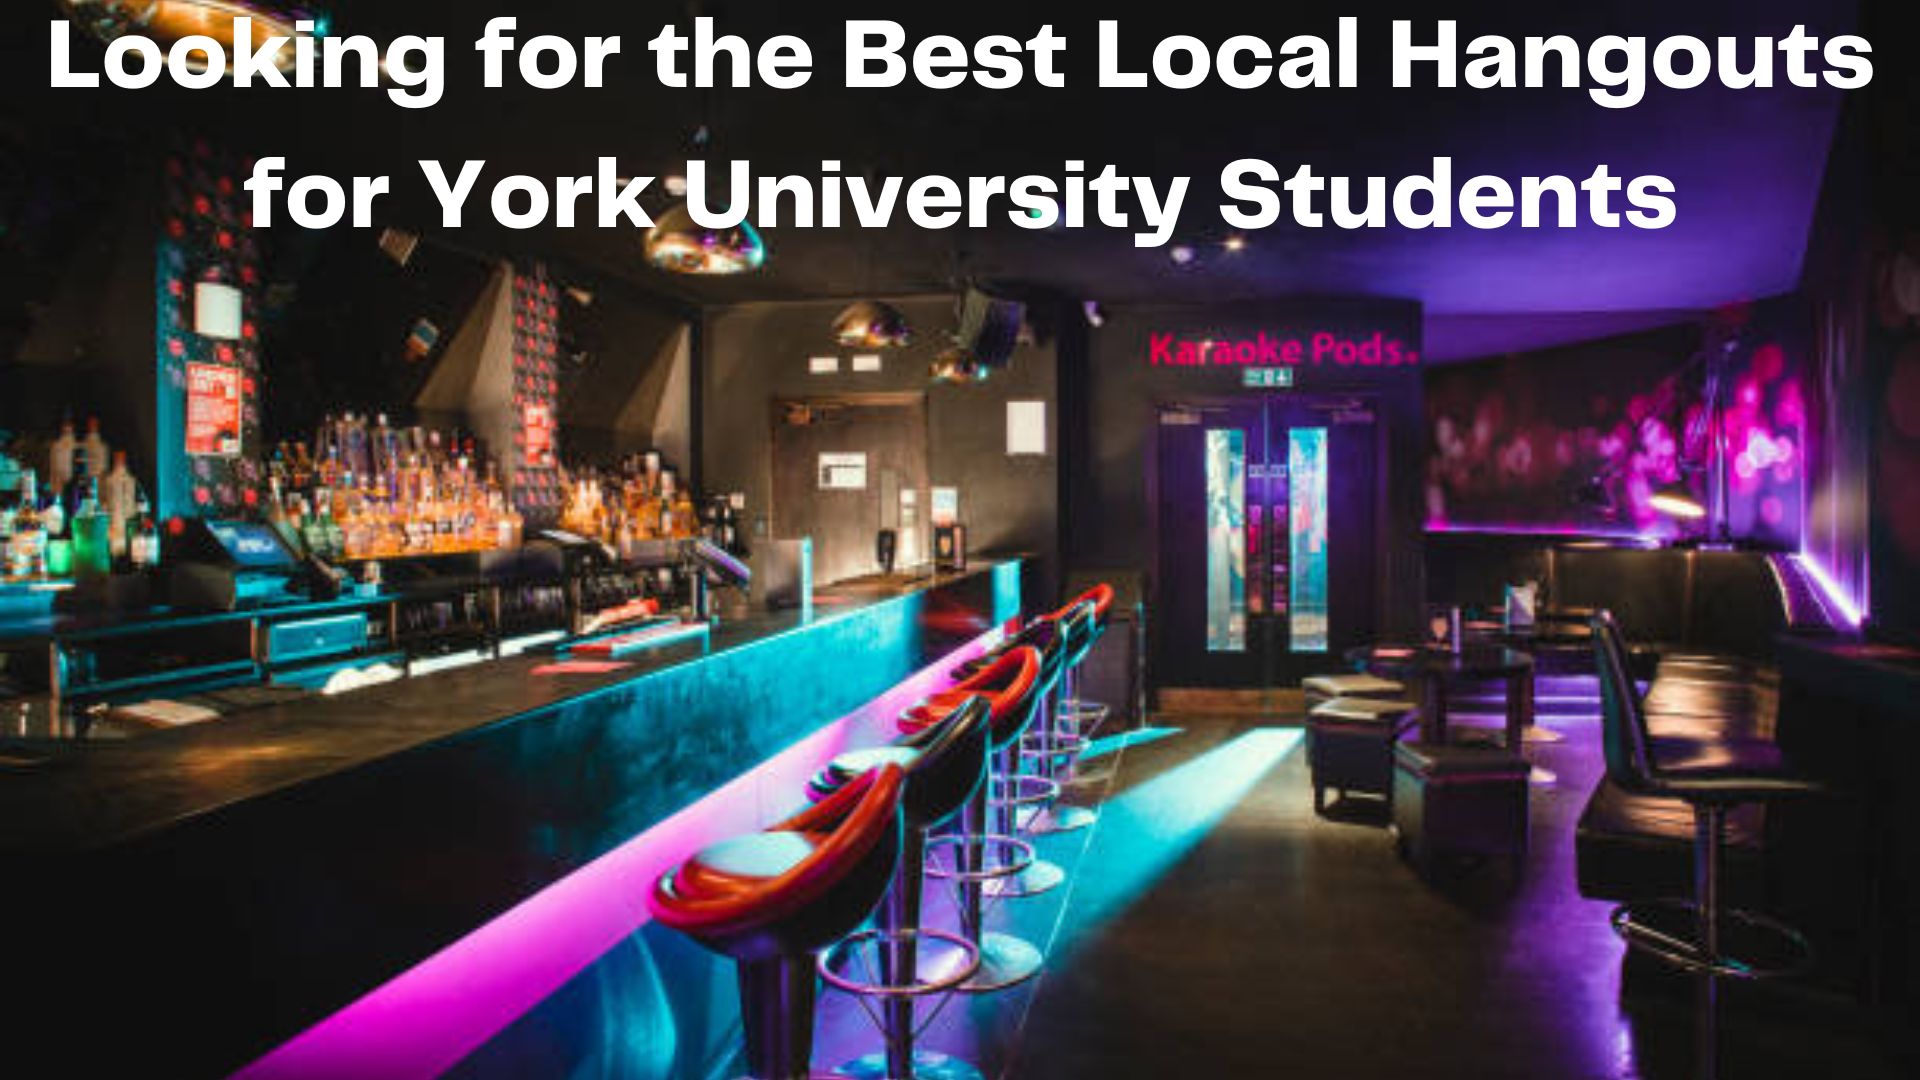 Looking for the Best Local Hangouts for York University Students